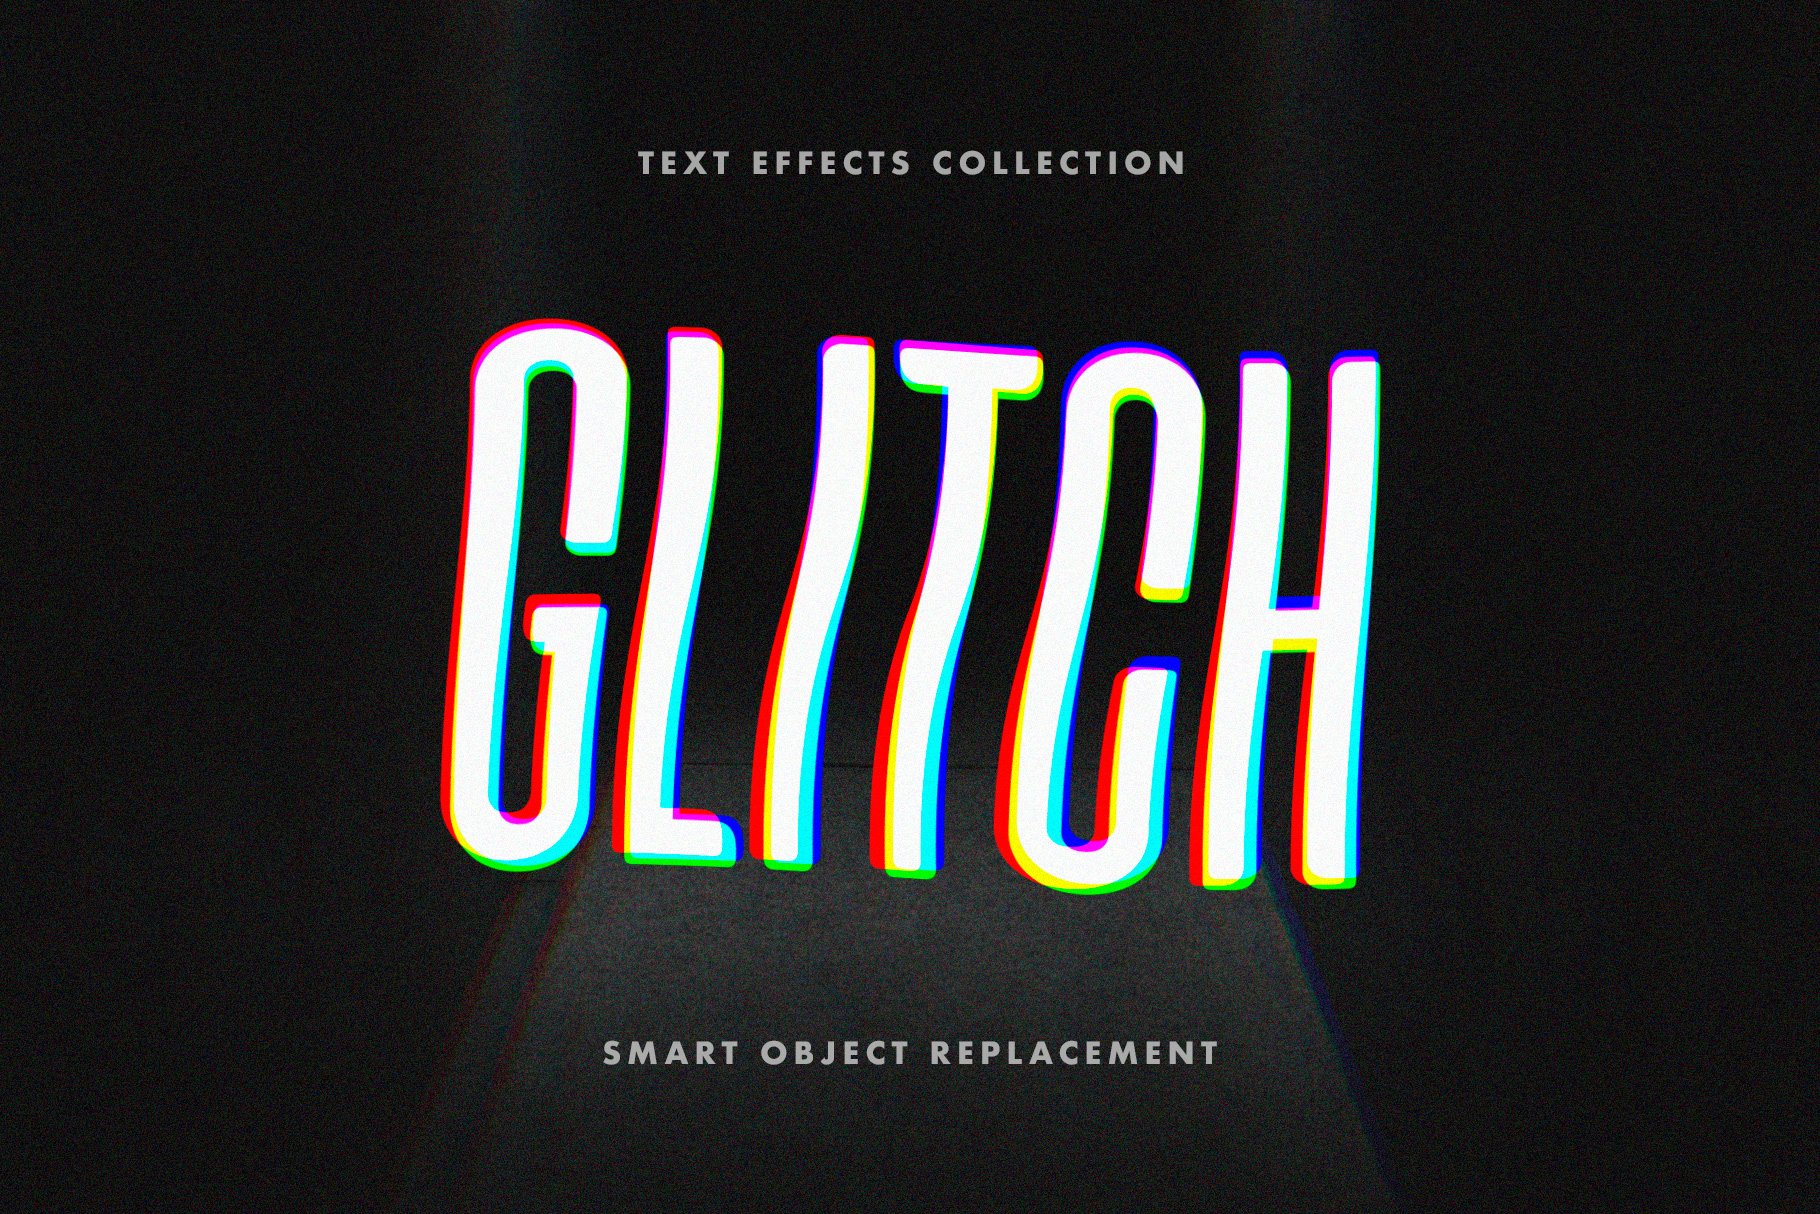 Glitch Text Effects Collectioncover image.